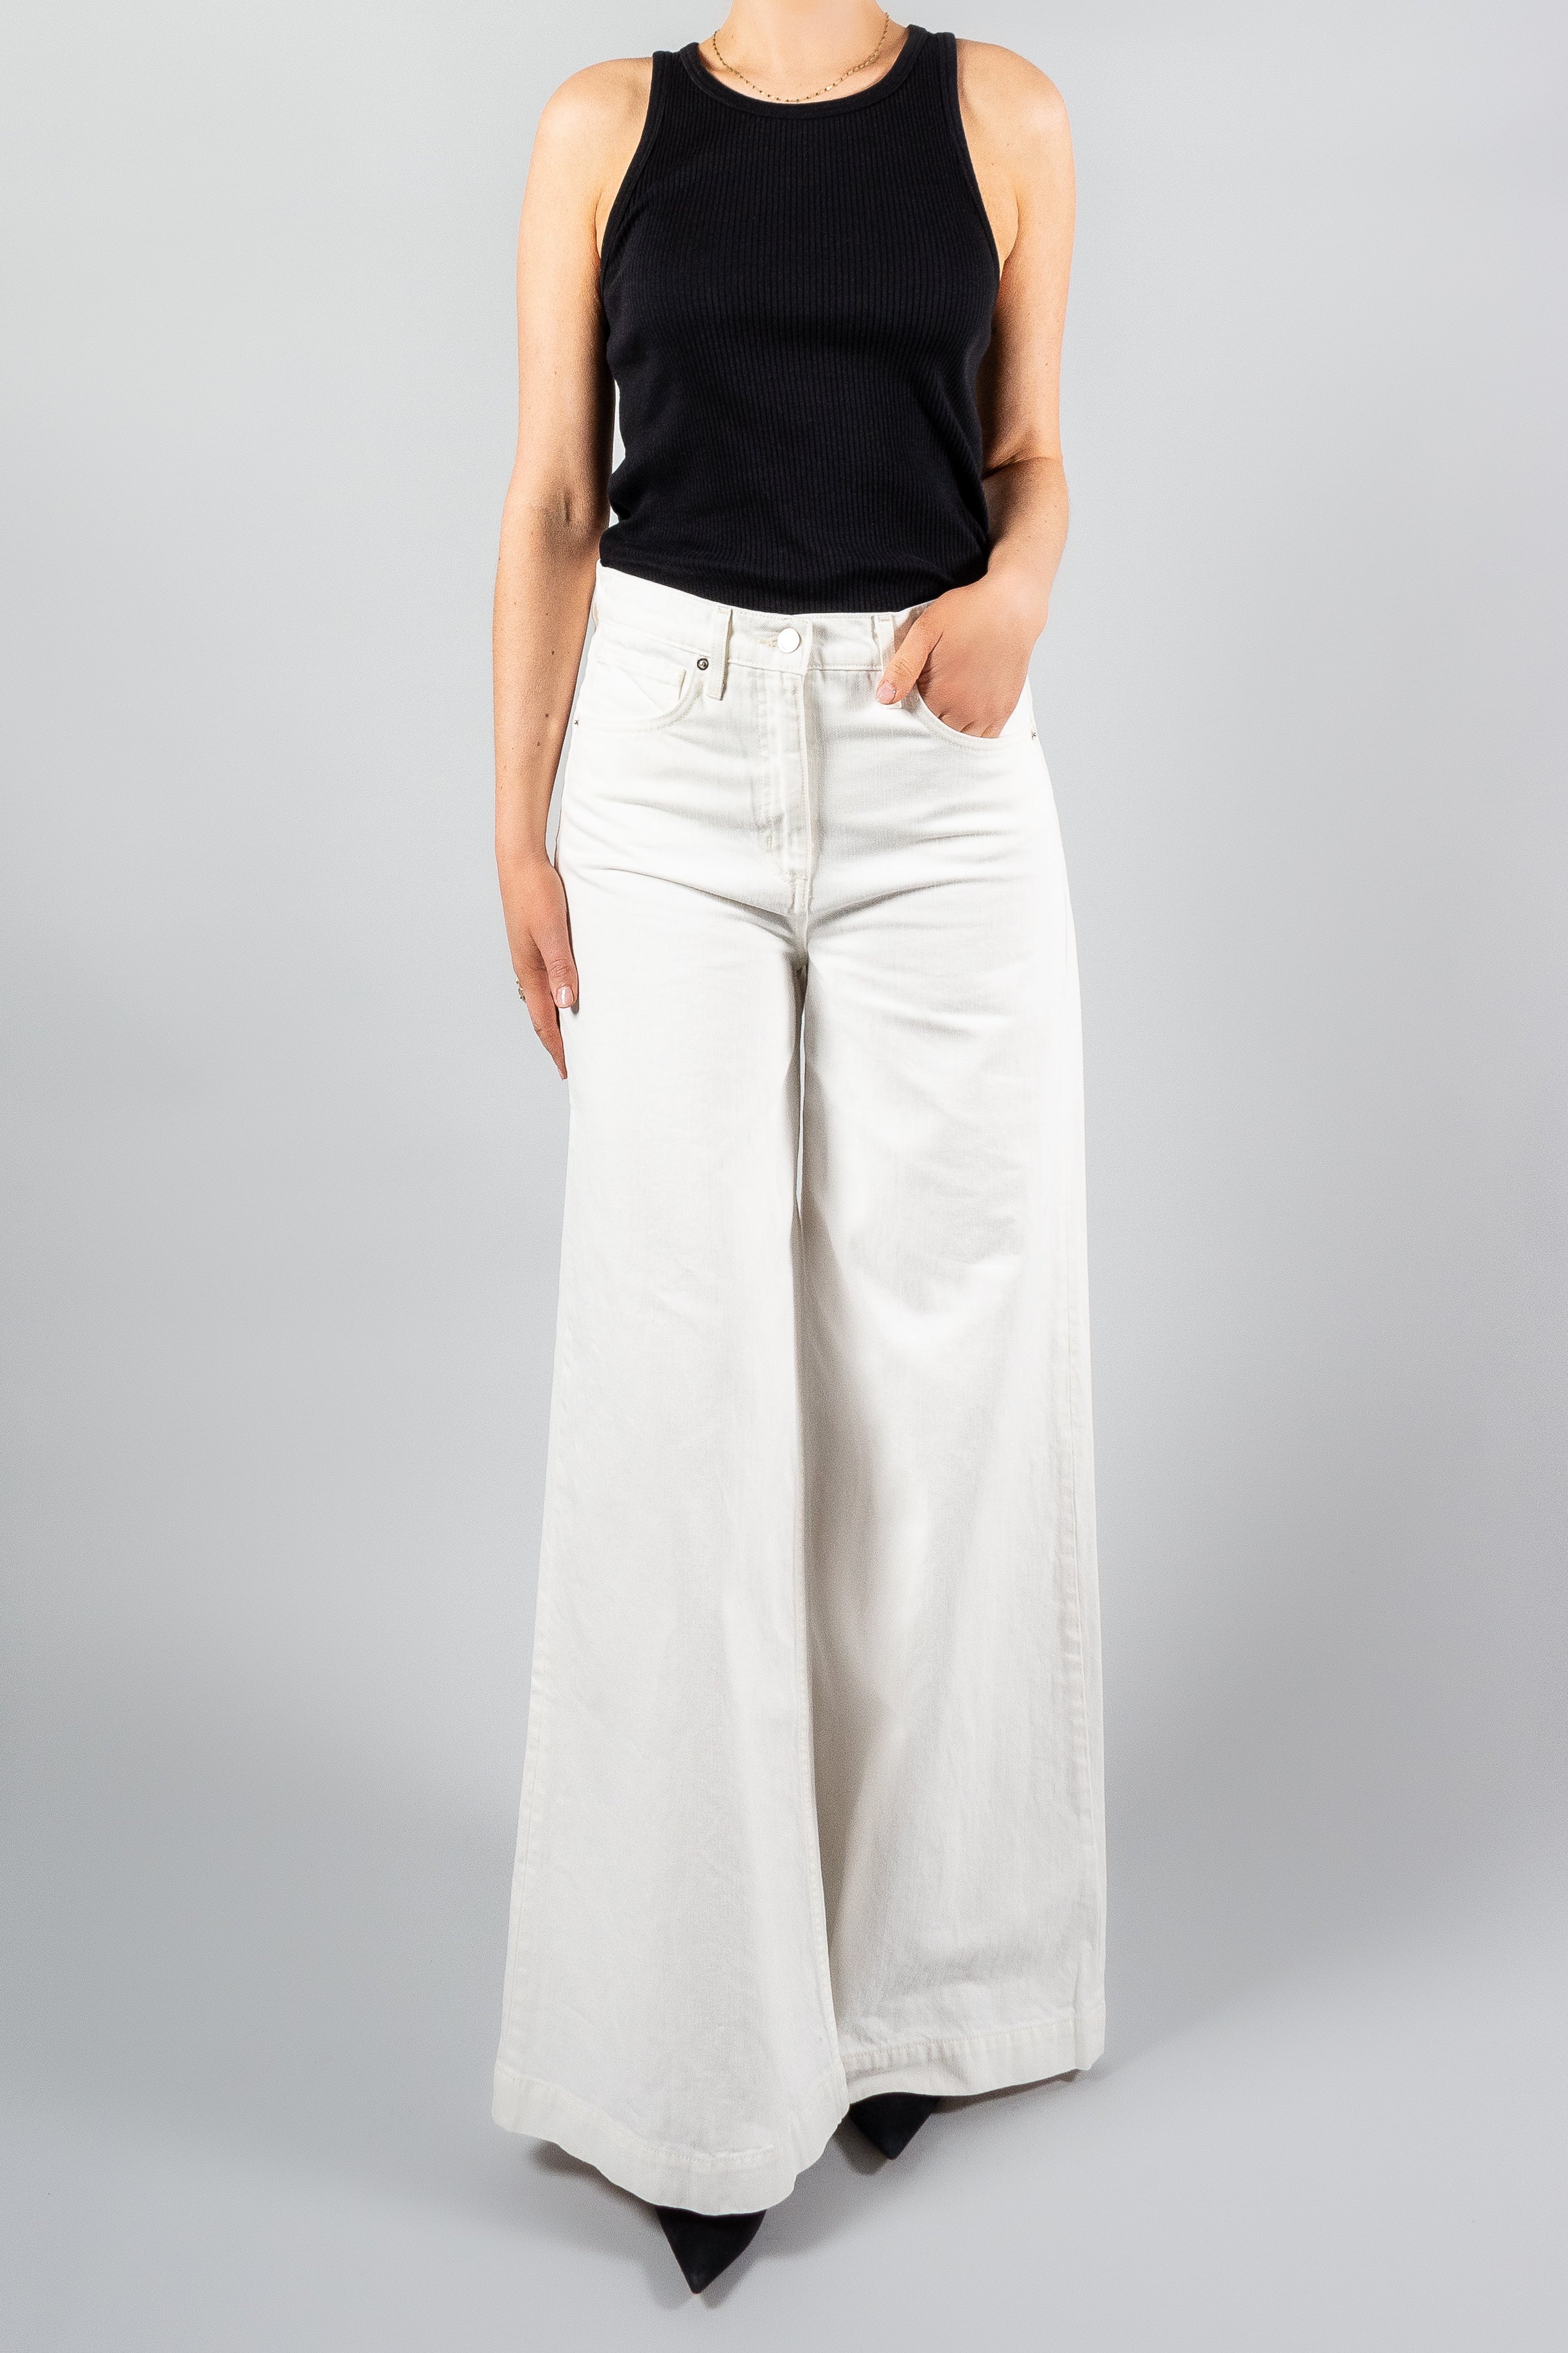 Nili Lotan Rolland Jean-Pants and Shorts-Misch-Boutique-Vancouver-Canada-misch.ca